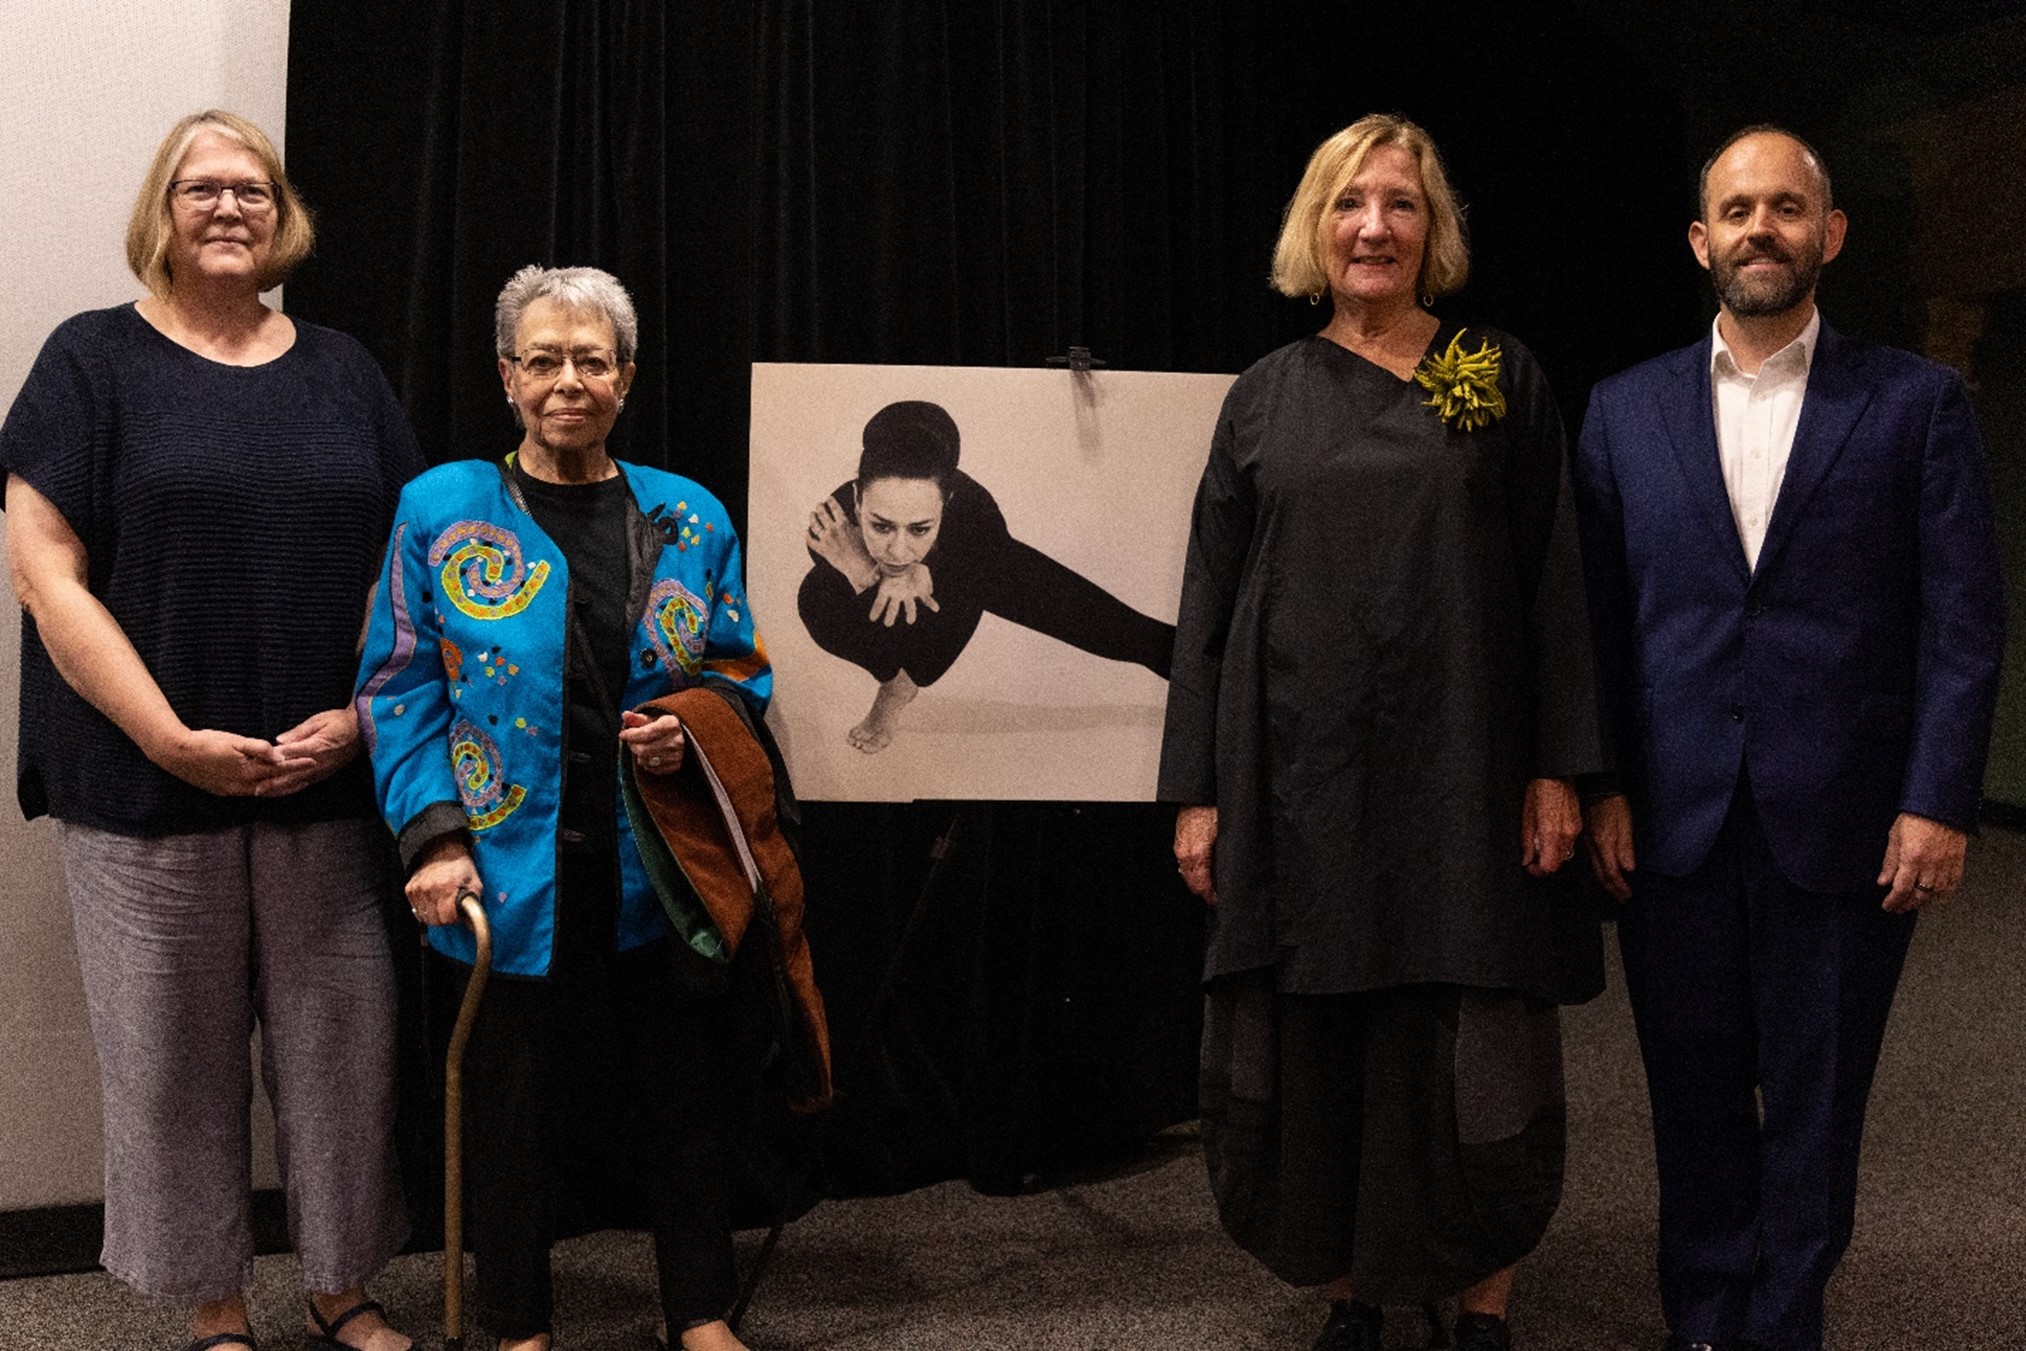 Picture of Glayds Bailin Stern, Elizabeth Sayrs, and Peggy Viehweger posing next to a large print of Gladys in a dance pose